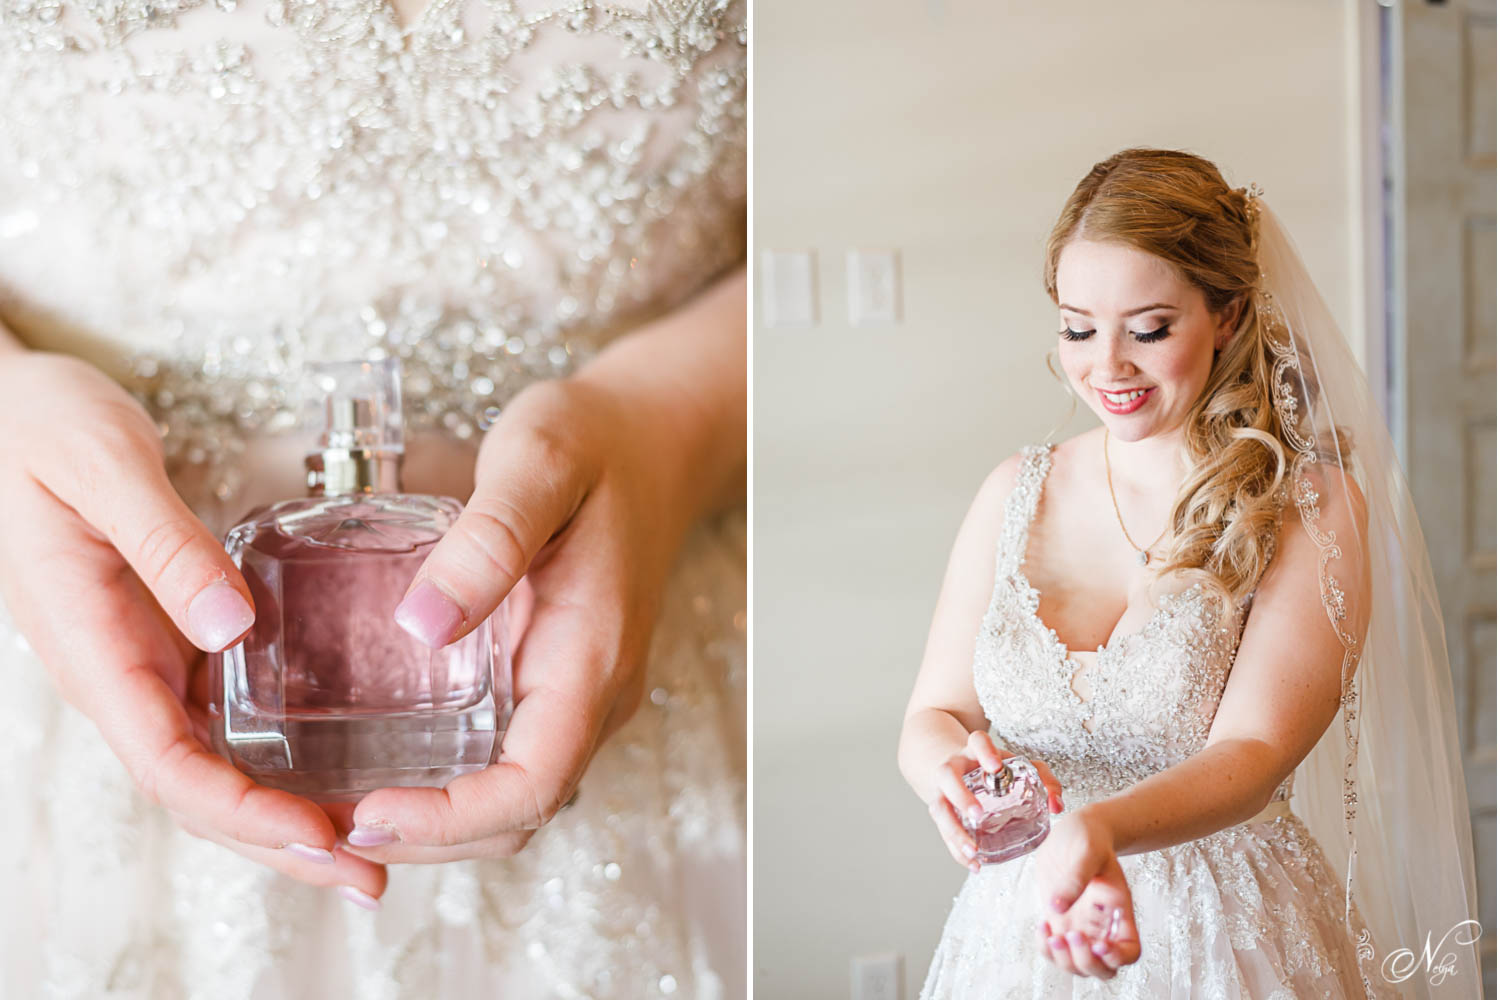 perfume bottle in woman's hands. And bride putting perfume on her wrists near a window on her wedding day.